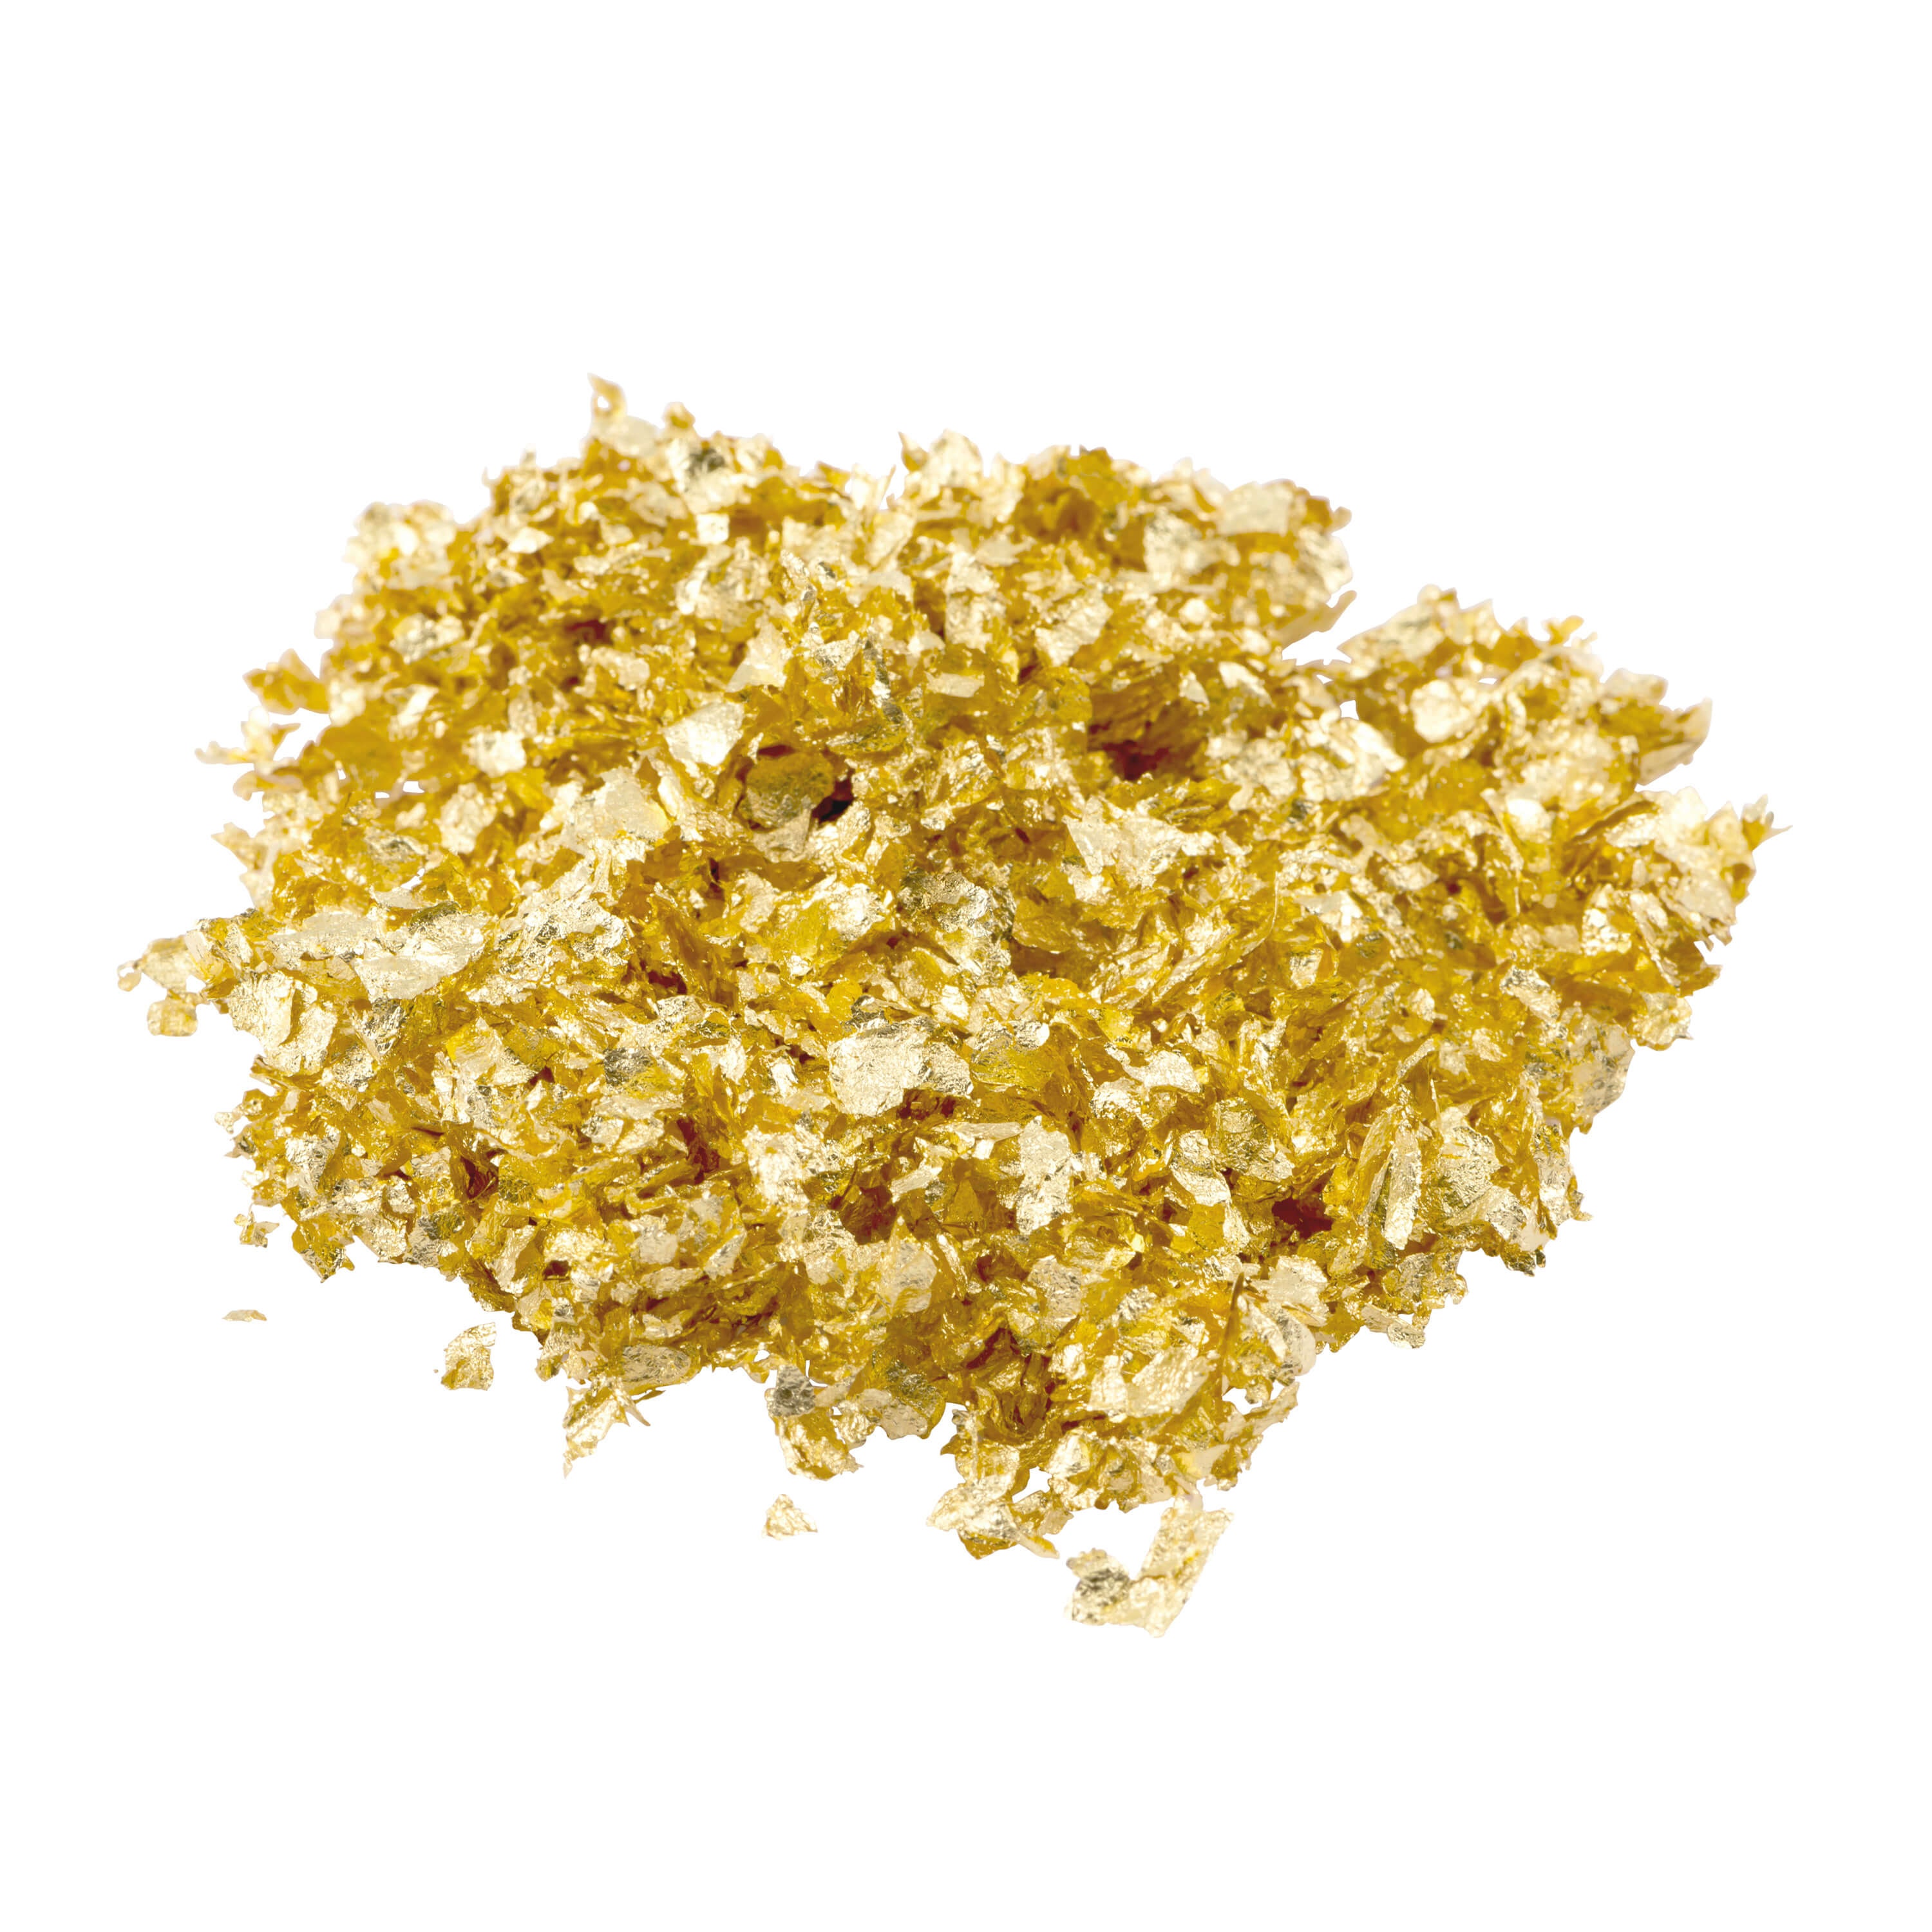 Edible Gold Flakes - Superfine